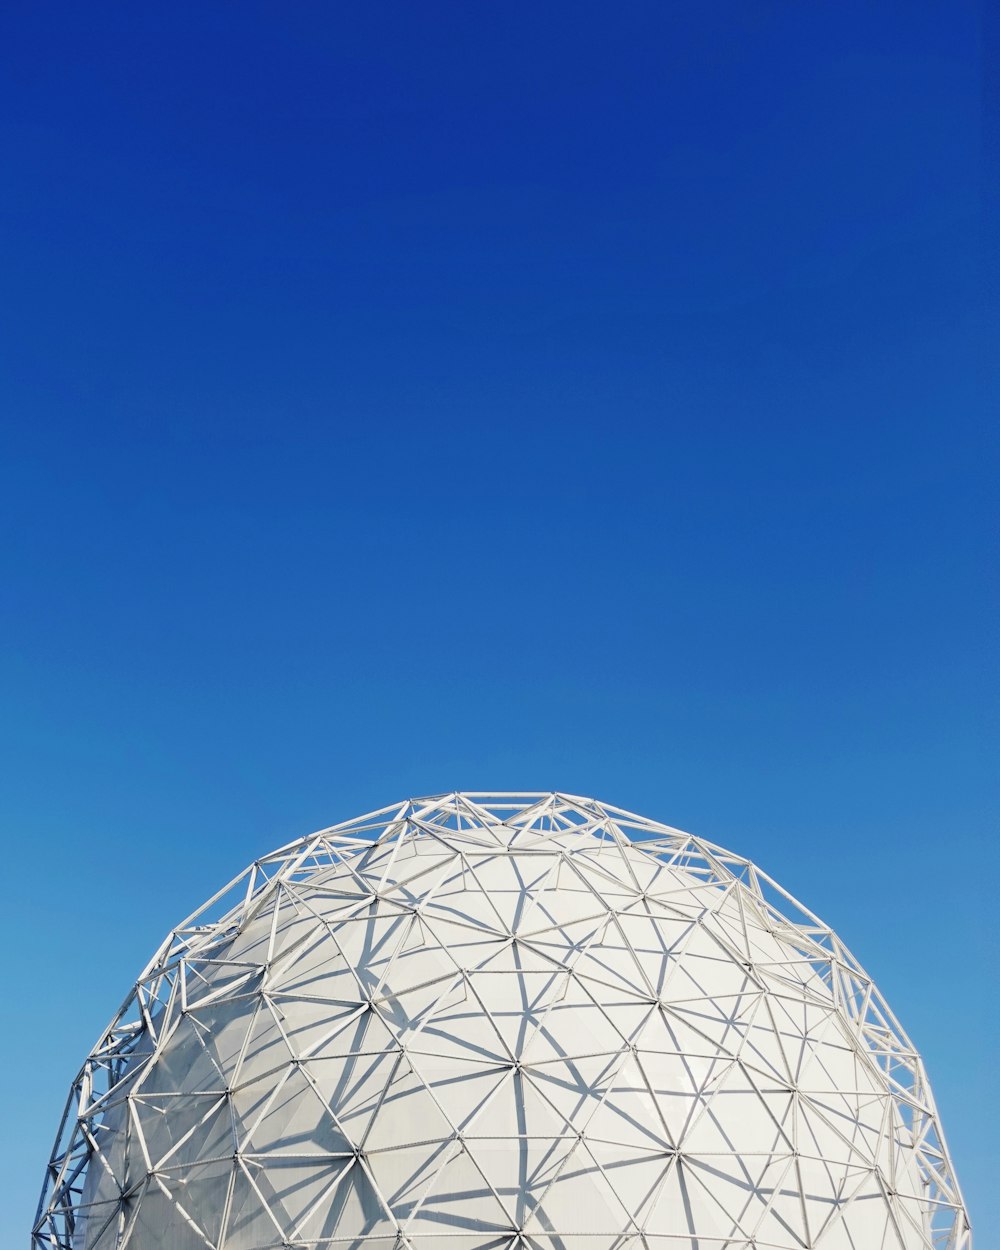 white metal dome under blue sky